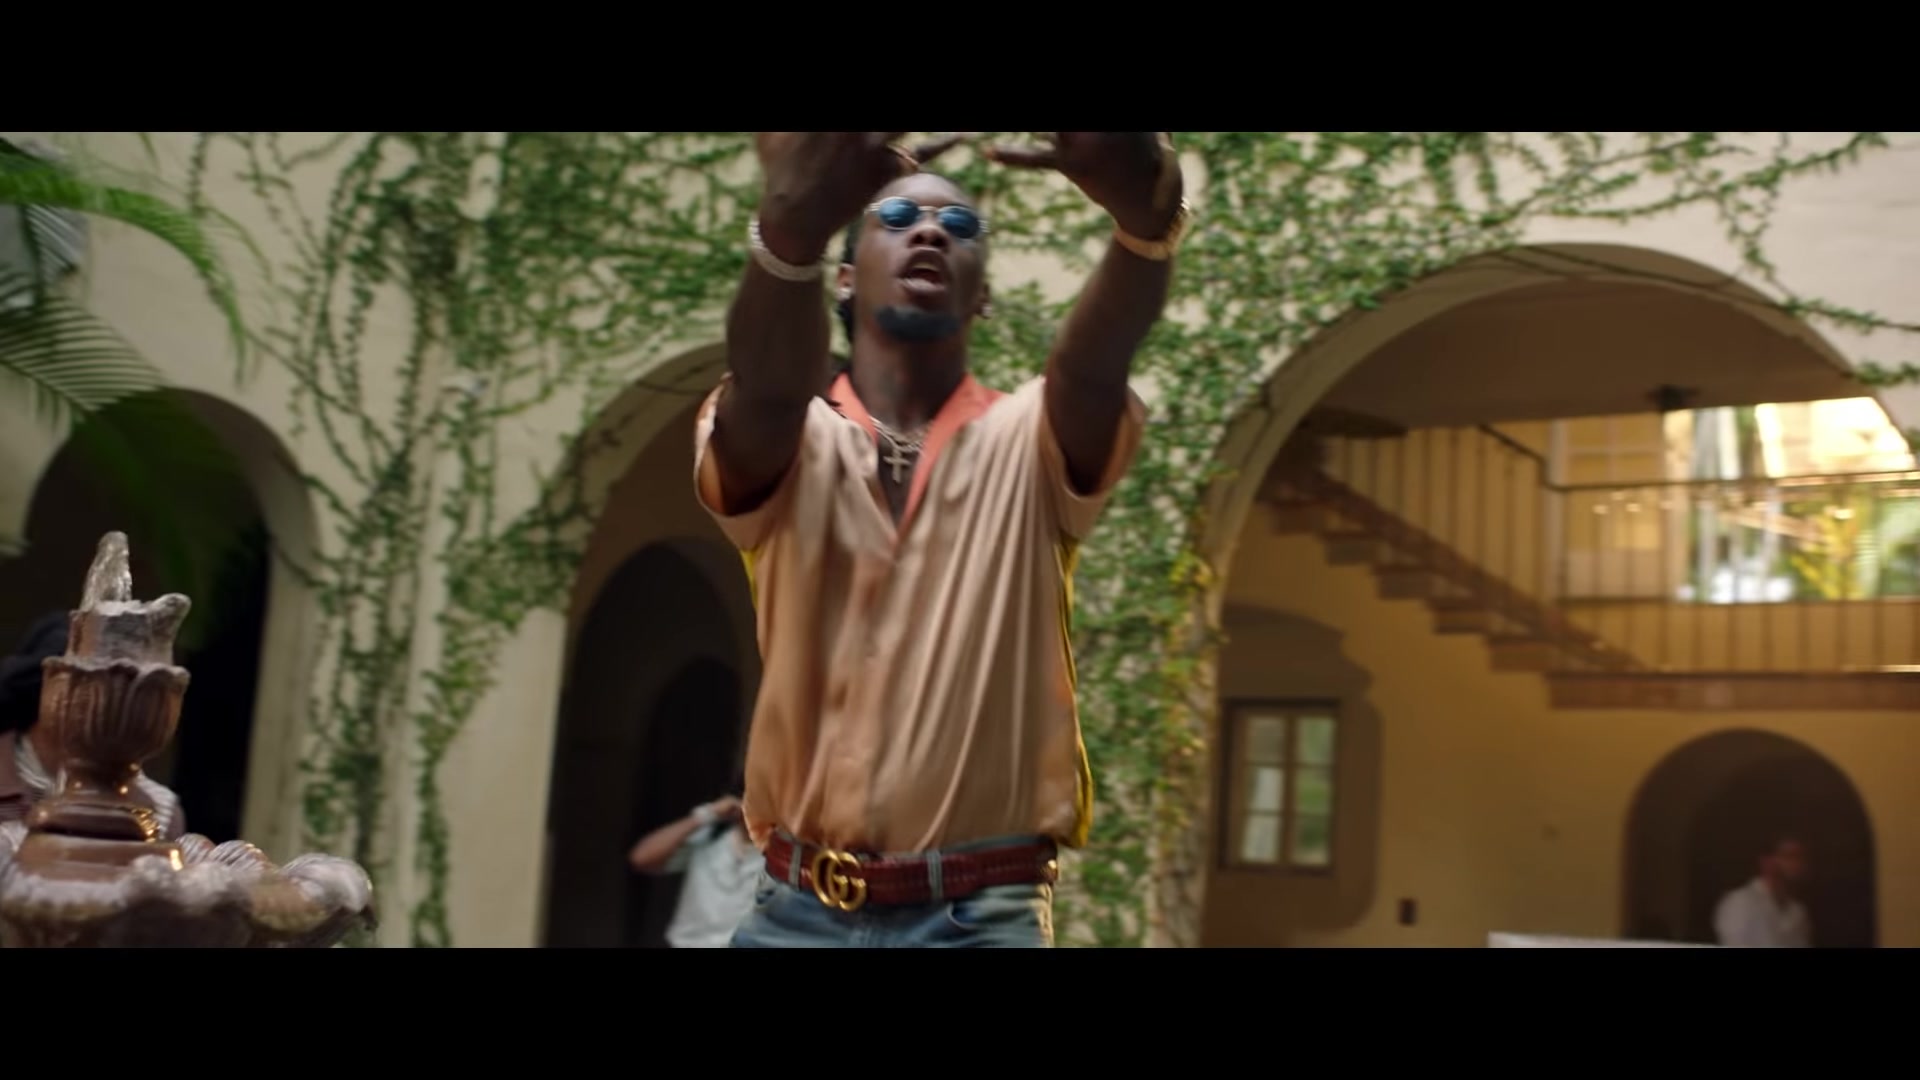 Gucci Belt in Narcos by Migos (2018)